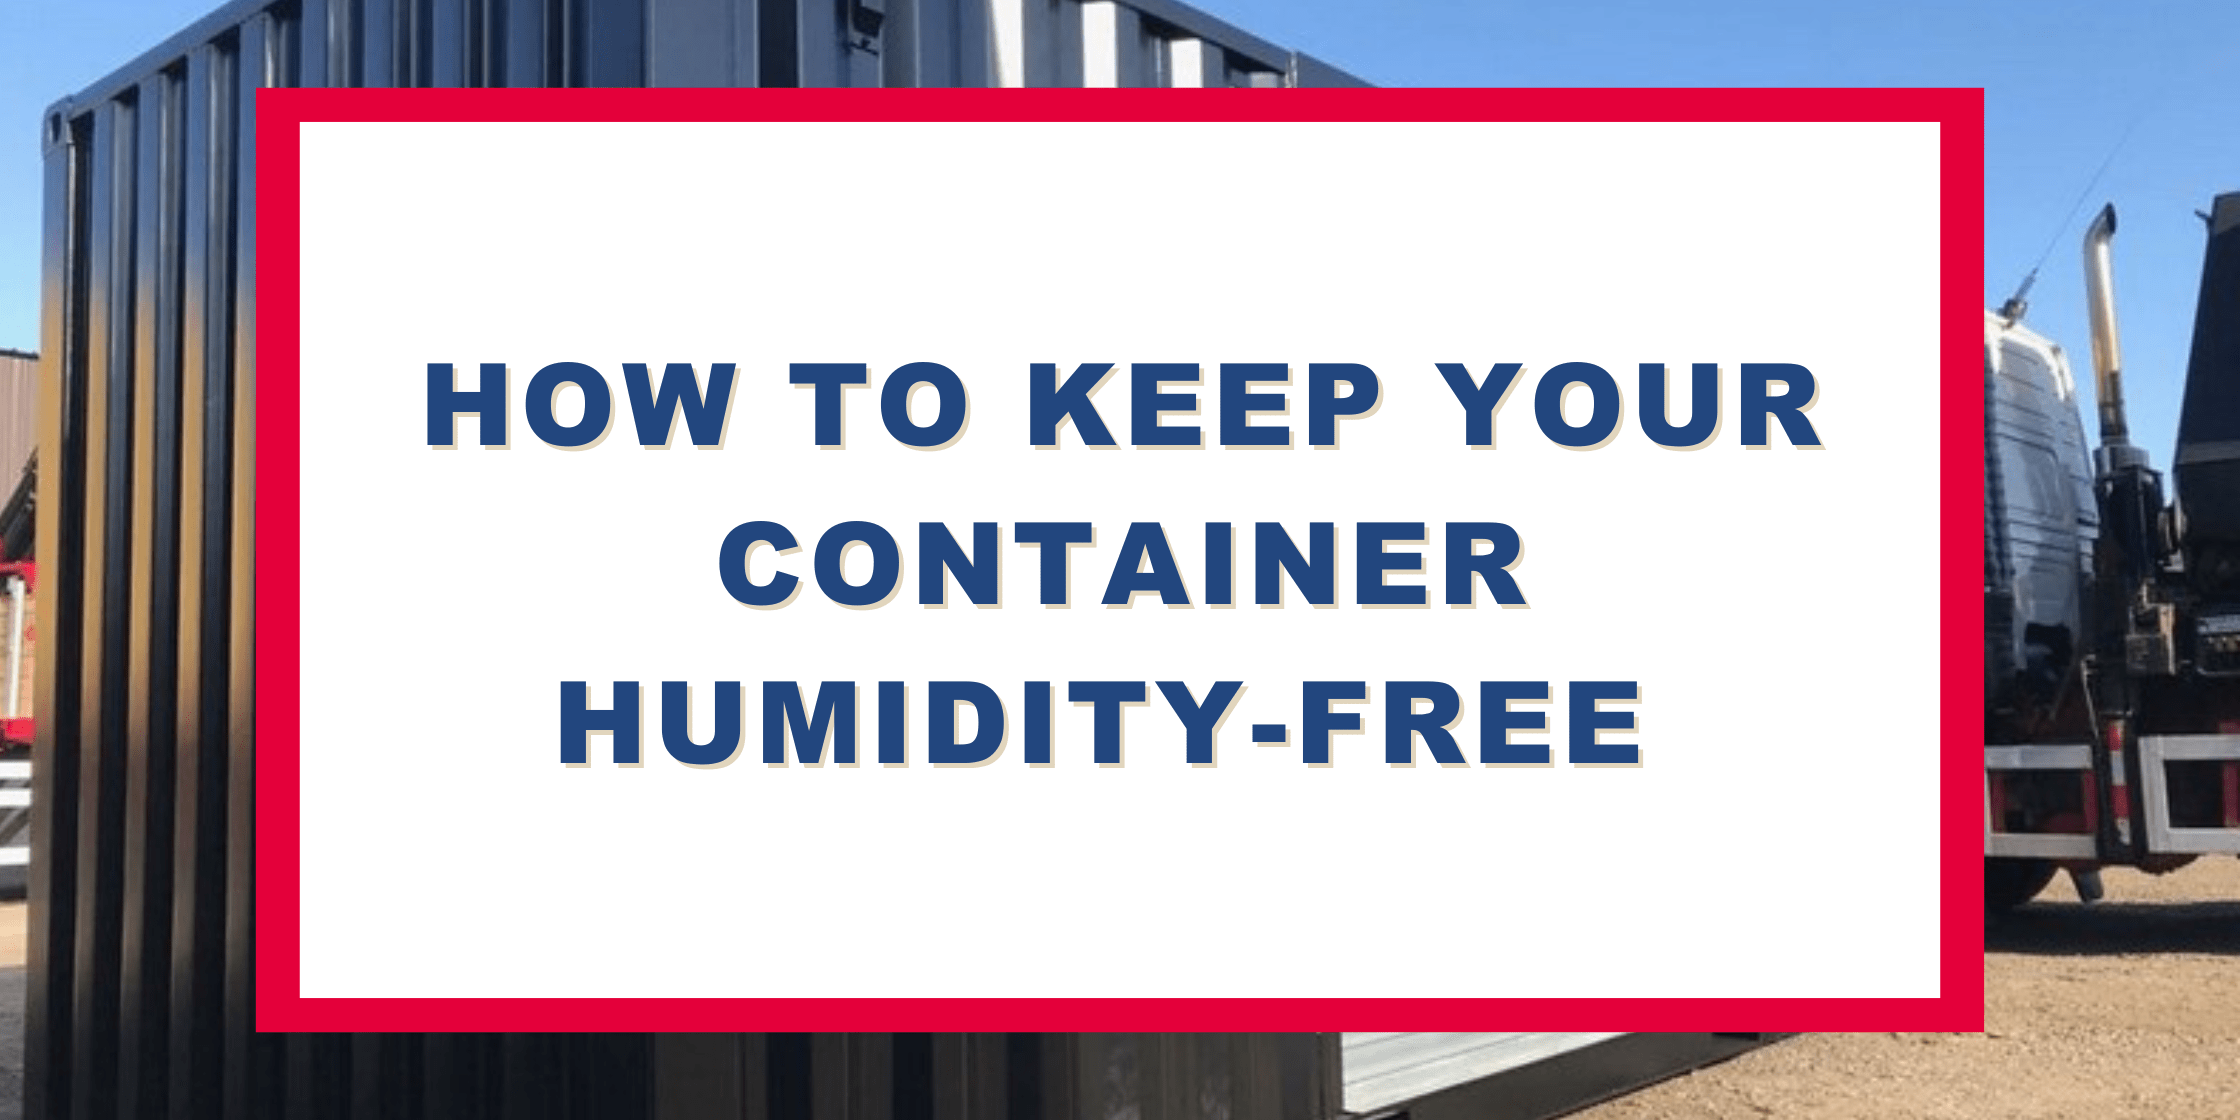 How To Keep Your Container Humidity-Free